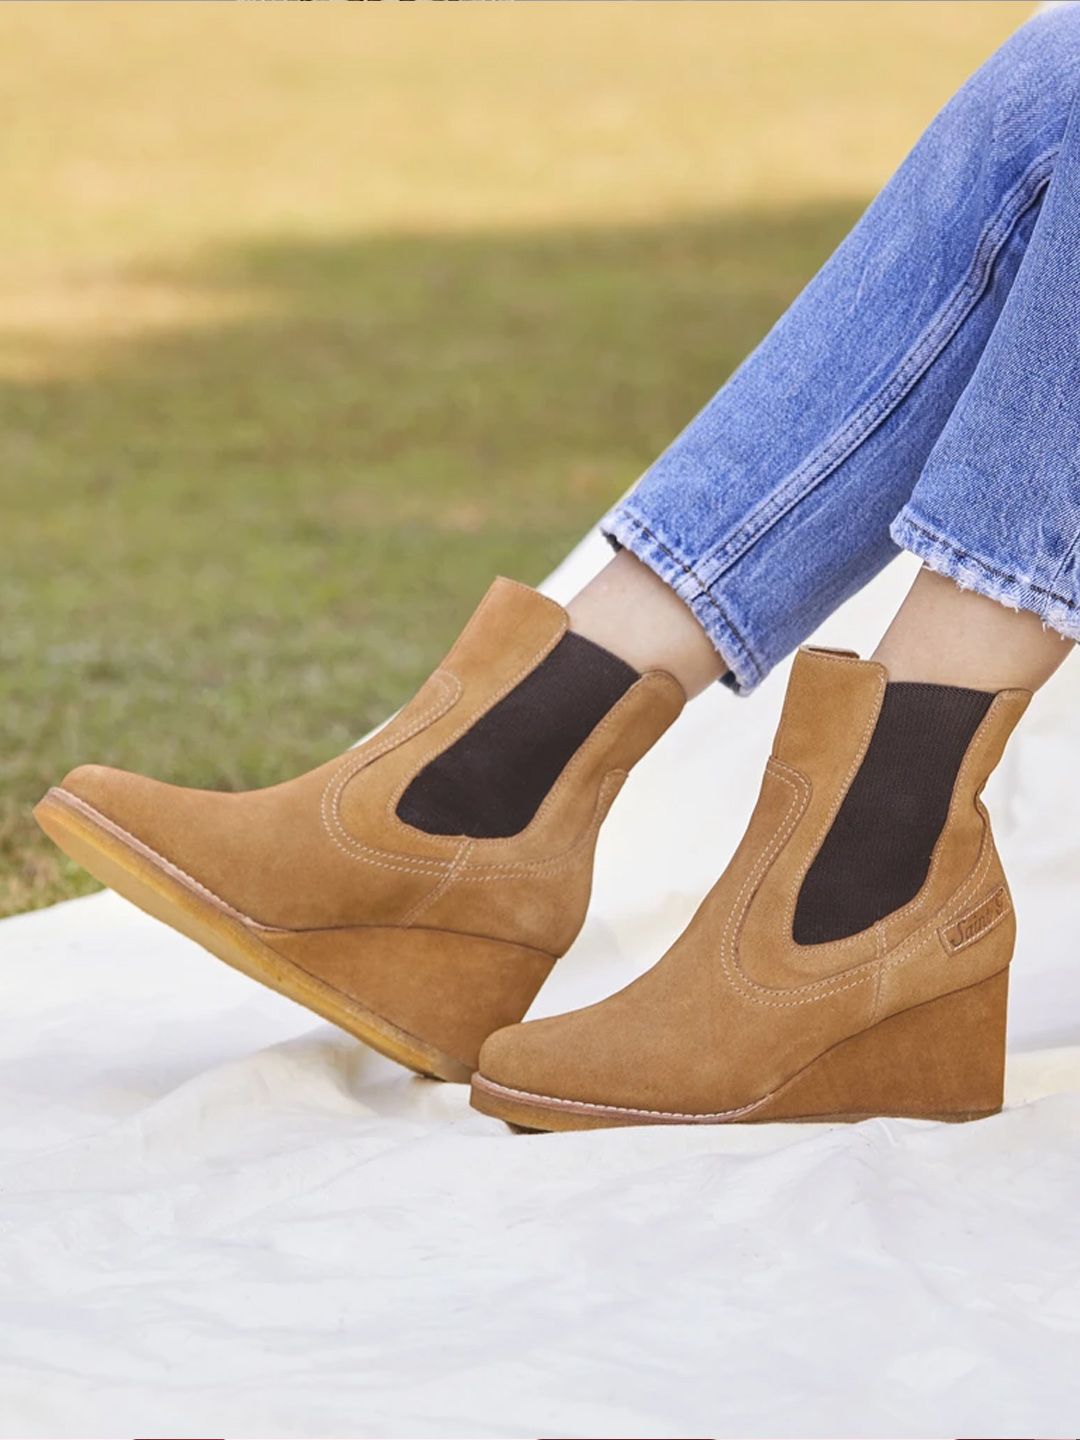 Saint G Tan Brown Suede Leather Mid Heel Wedge Boots Price in India